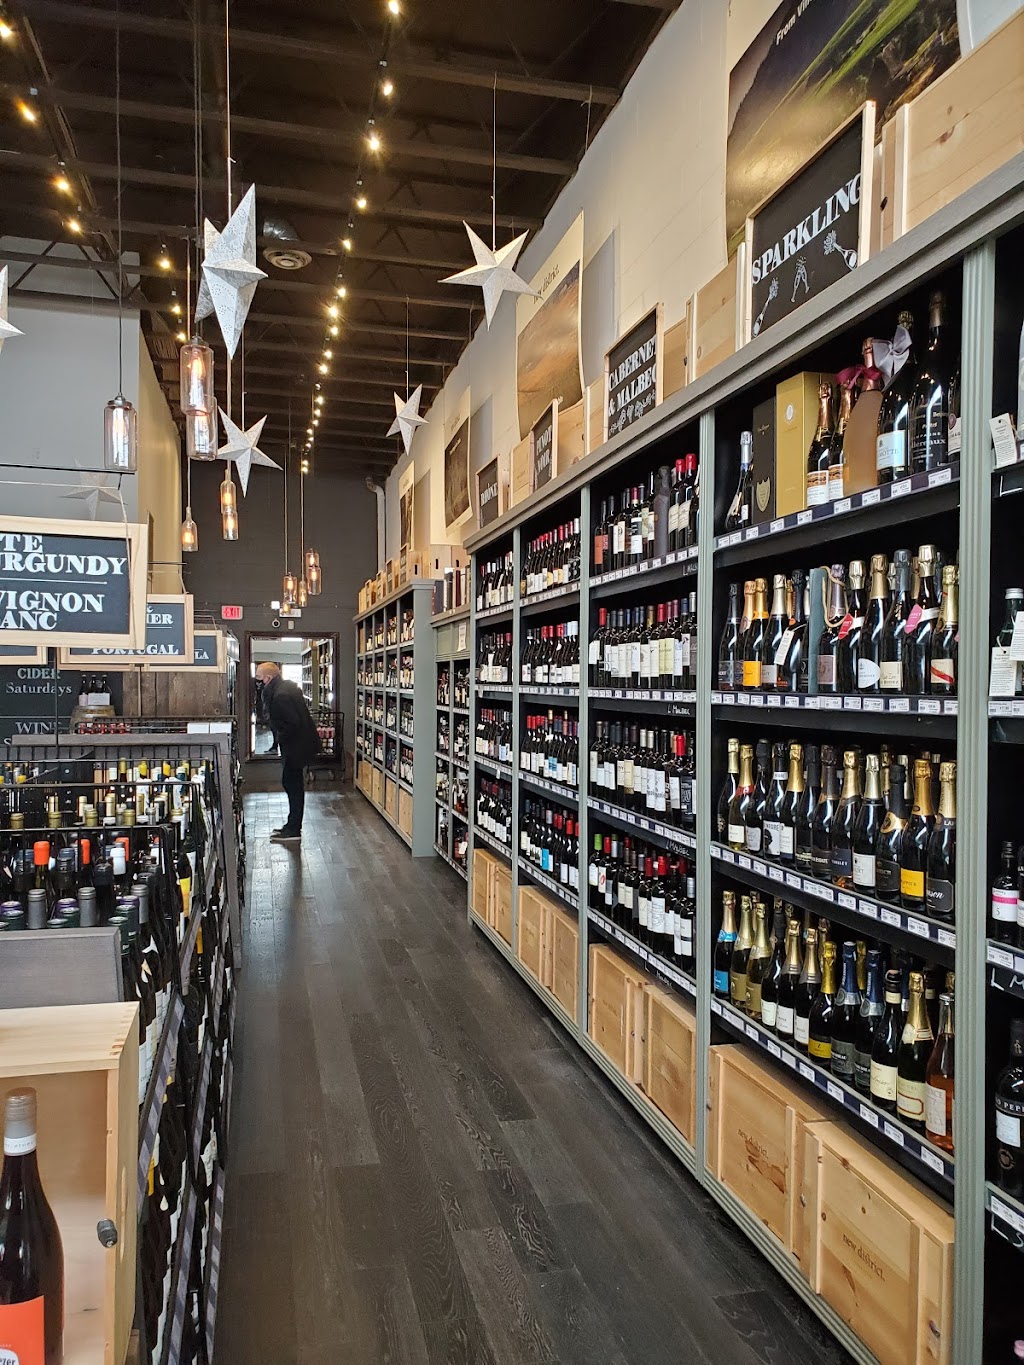 New District Wine Beer Spirits | 5650 Dunbar St, Vancouver, BC V6N 1W7, Canada | Phone: (604) 267-2337